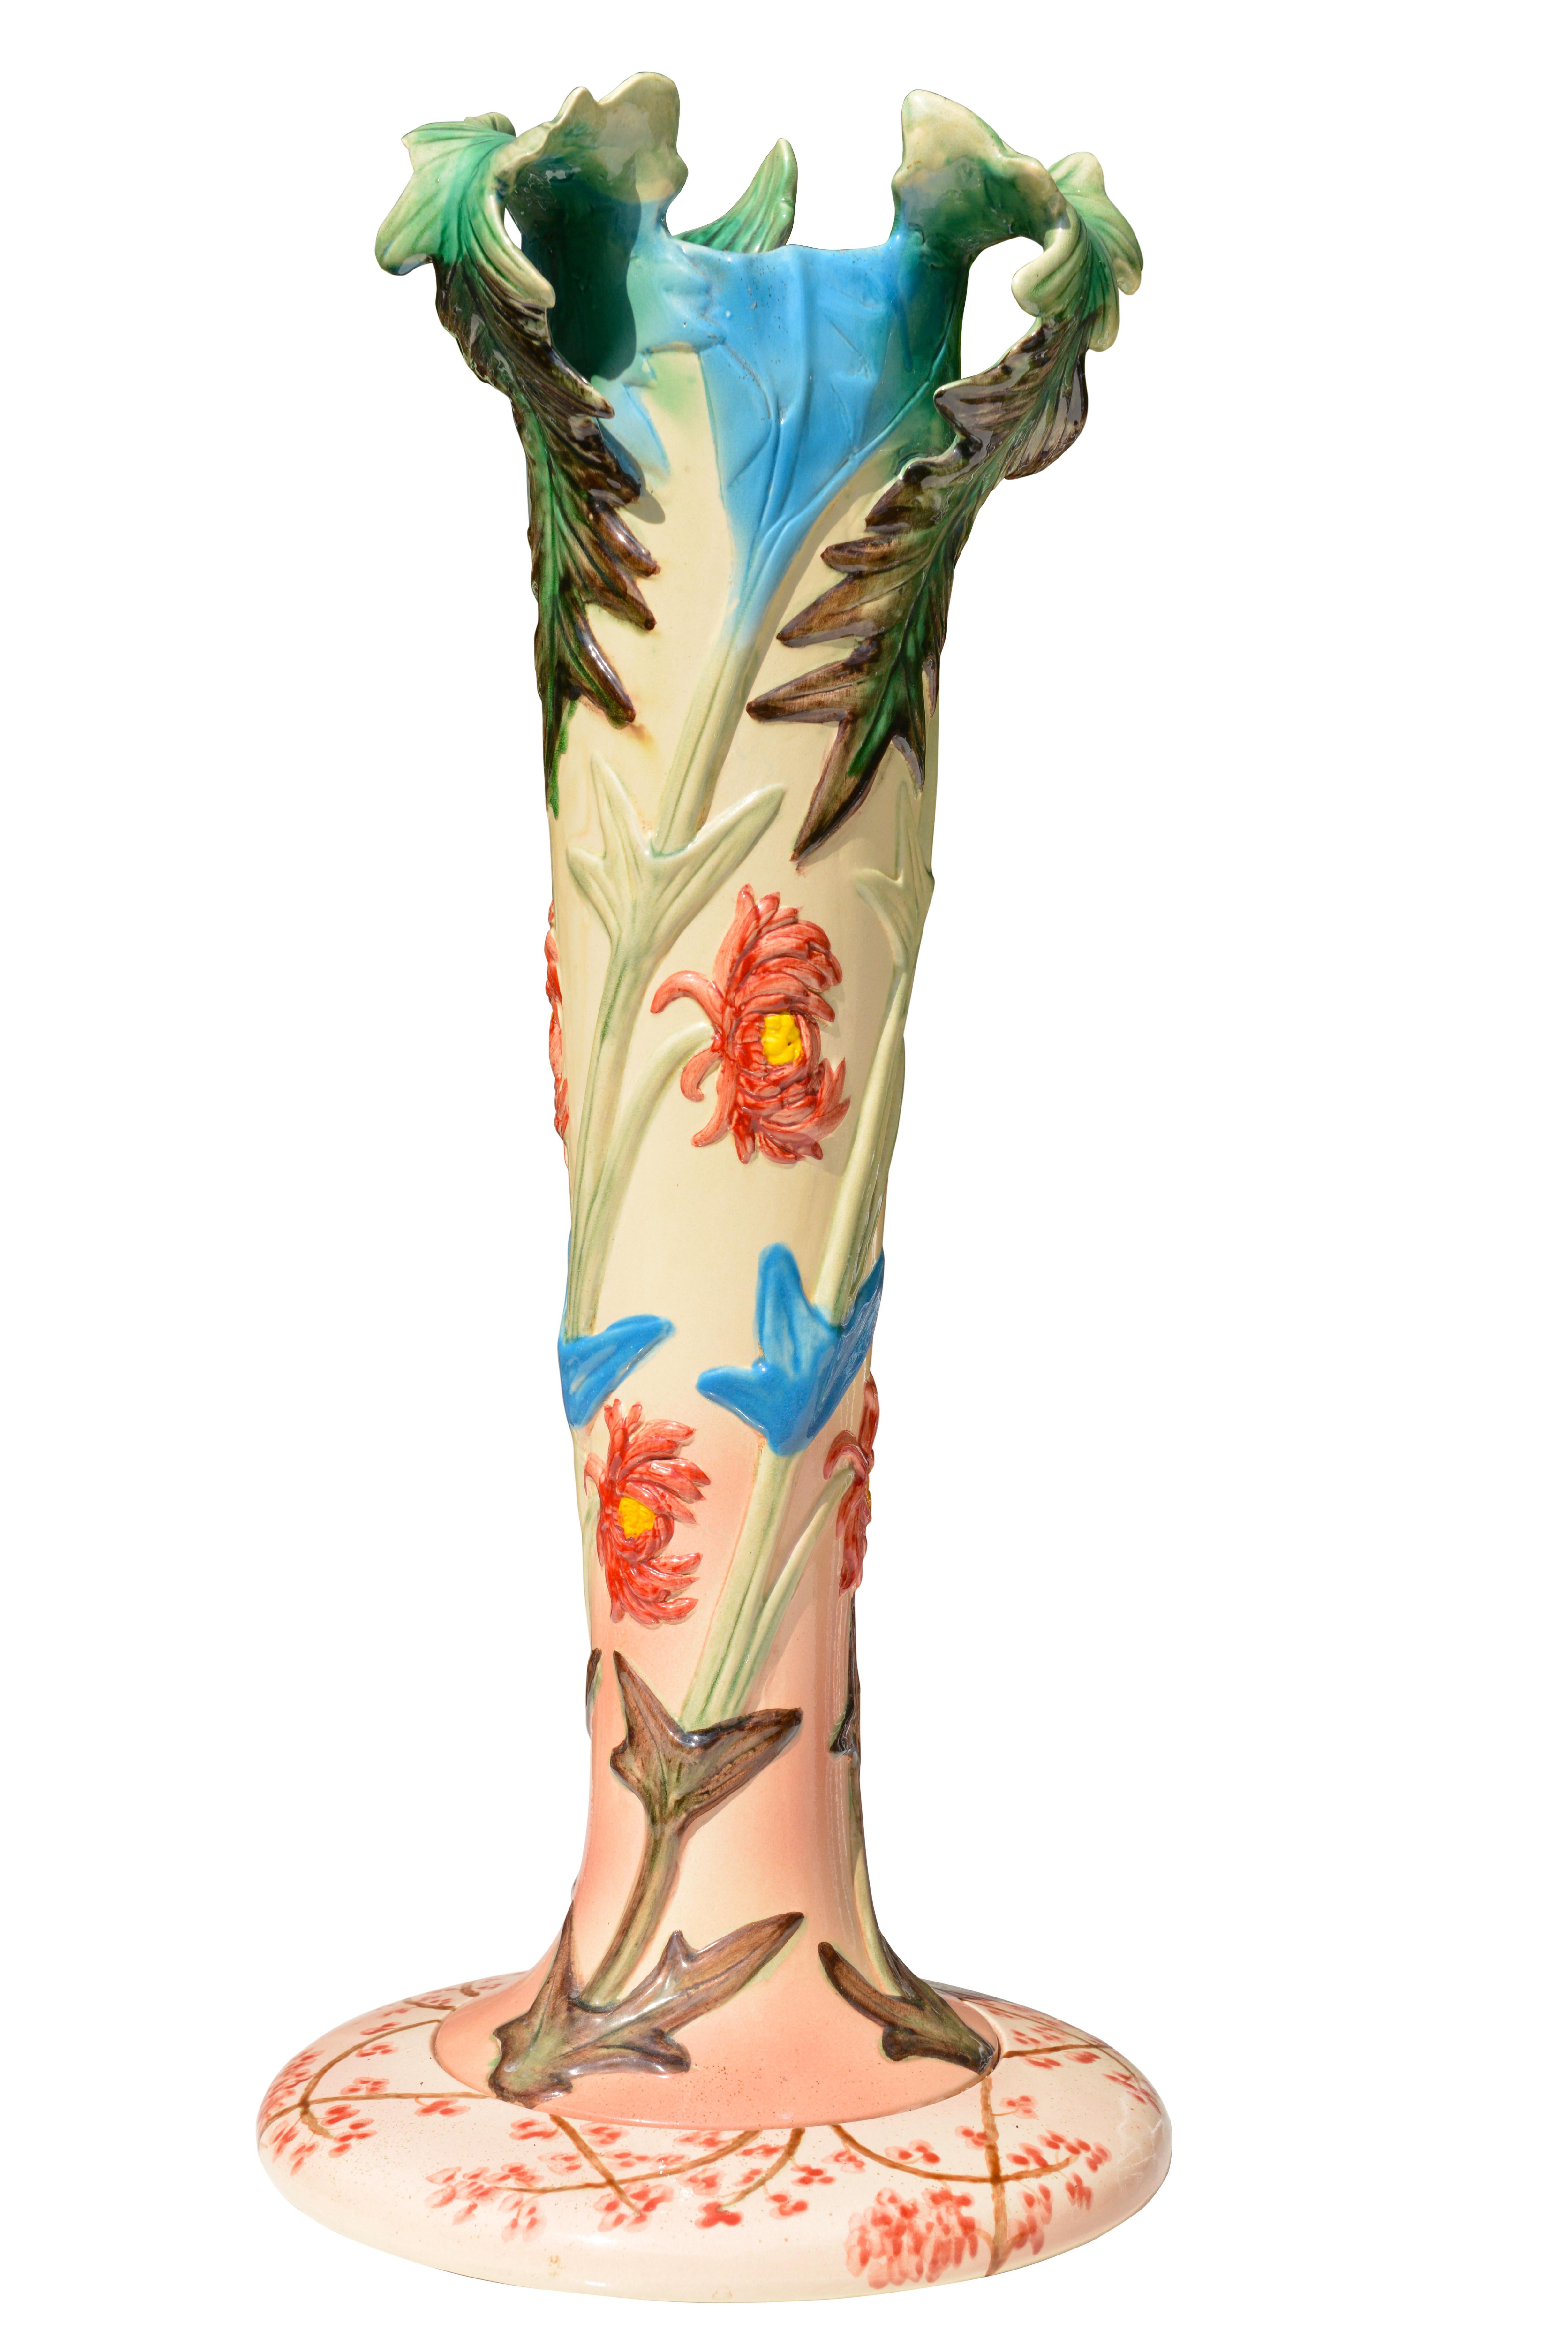 Unique romantic flower vase, made in France, circa 1900 in the Napoleon III style spirit. Tall and thin on a wide and stabile round base. Elegant green and brown acanthus leaves adorn the top. On the body are delicate chrysanthemum flowers in coral